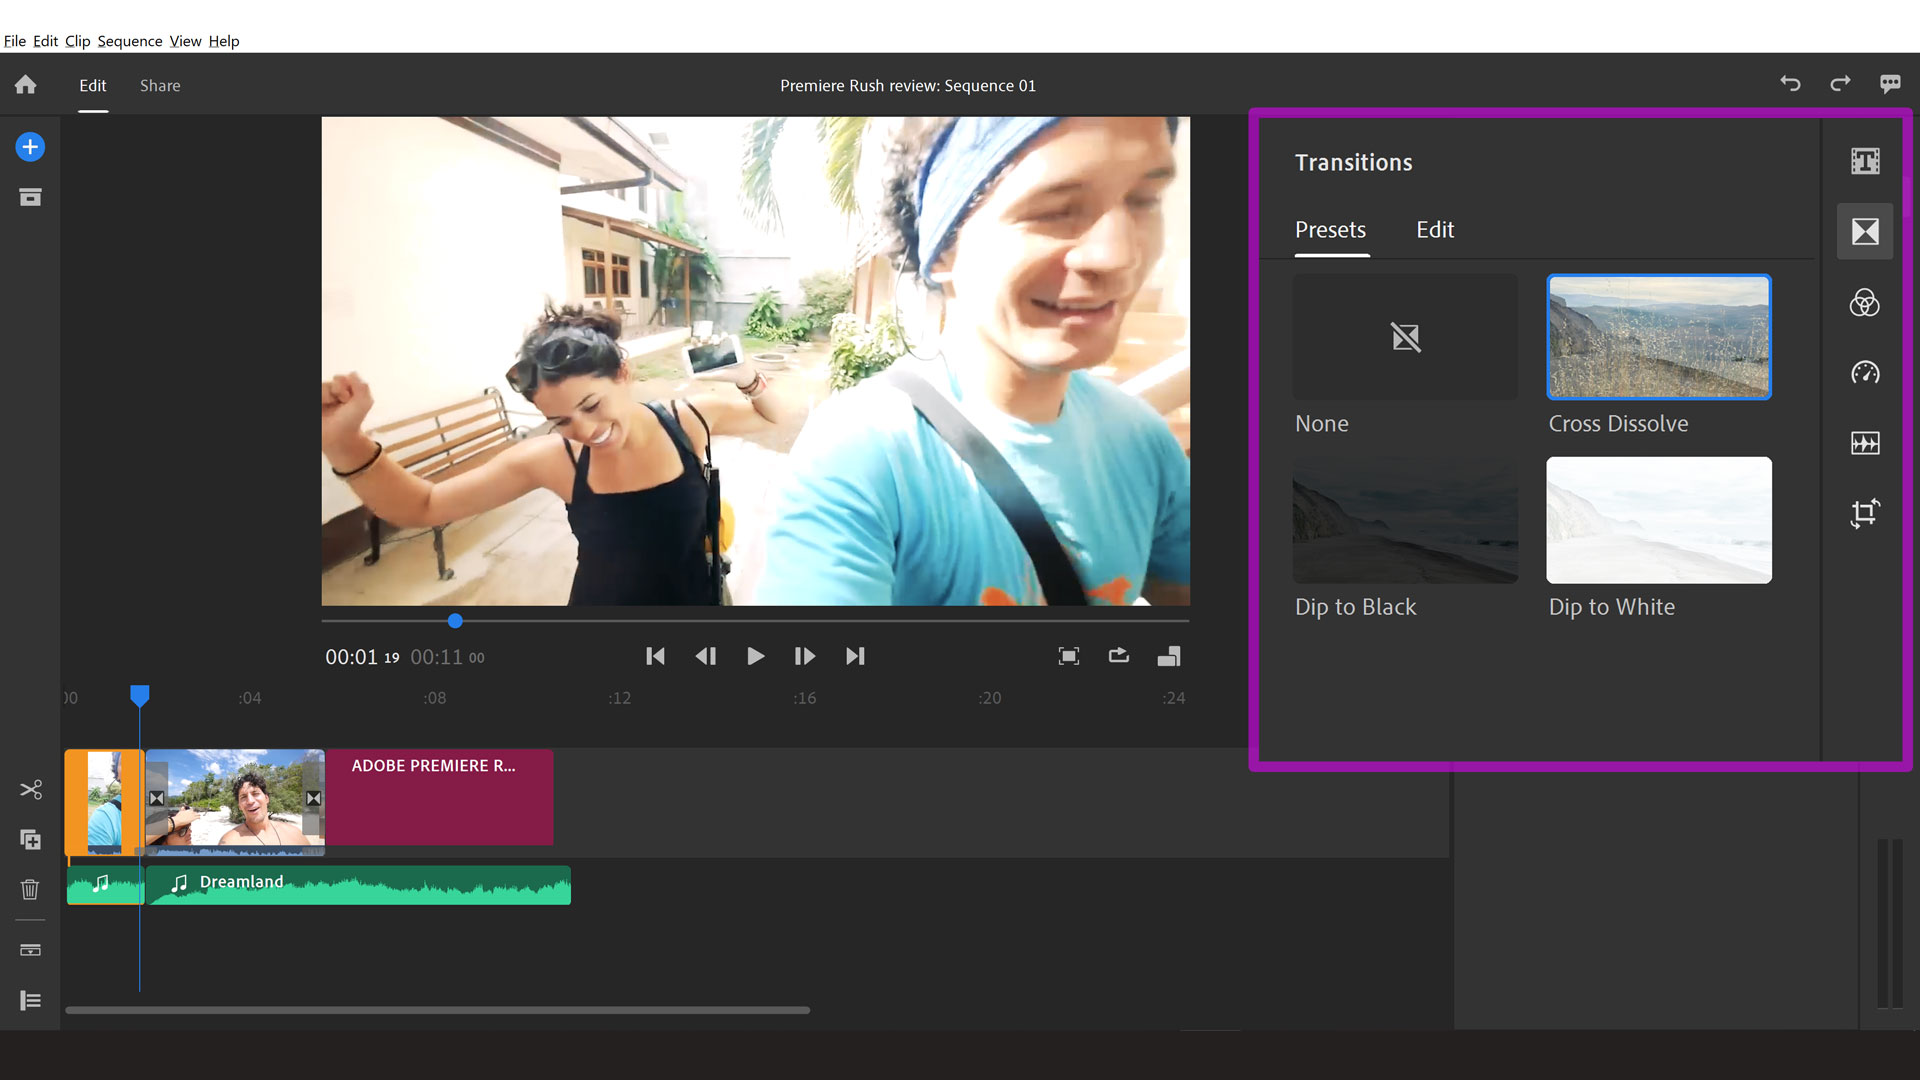 Interface of Premiere Rush, one of the best video editing software tools